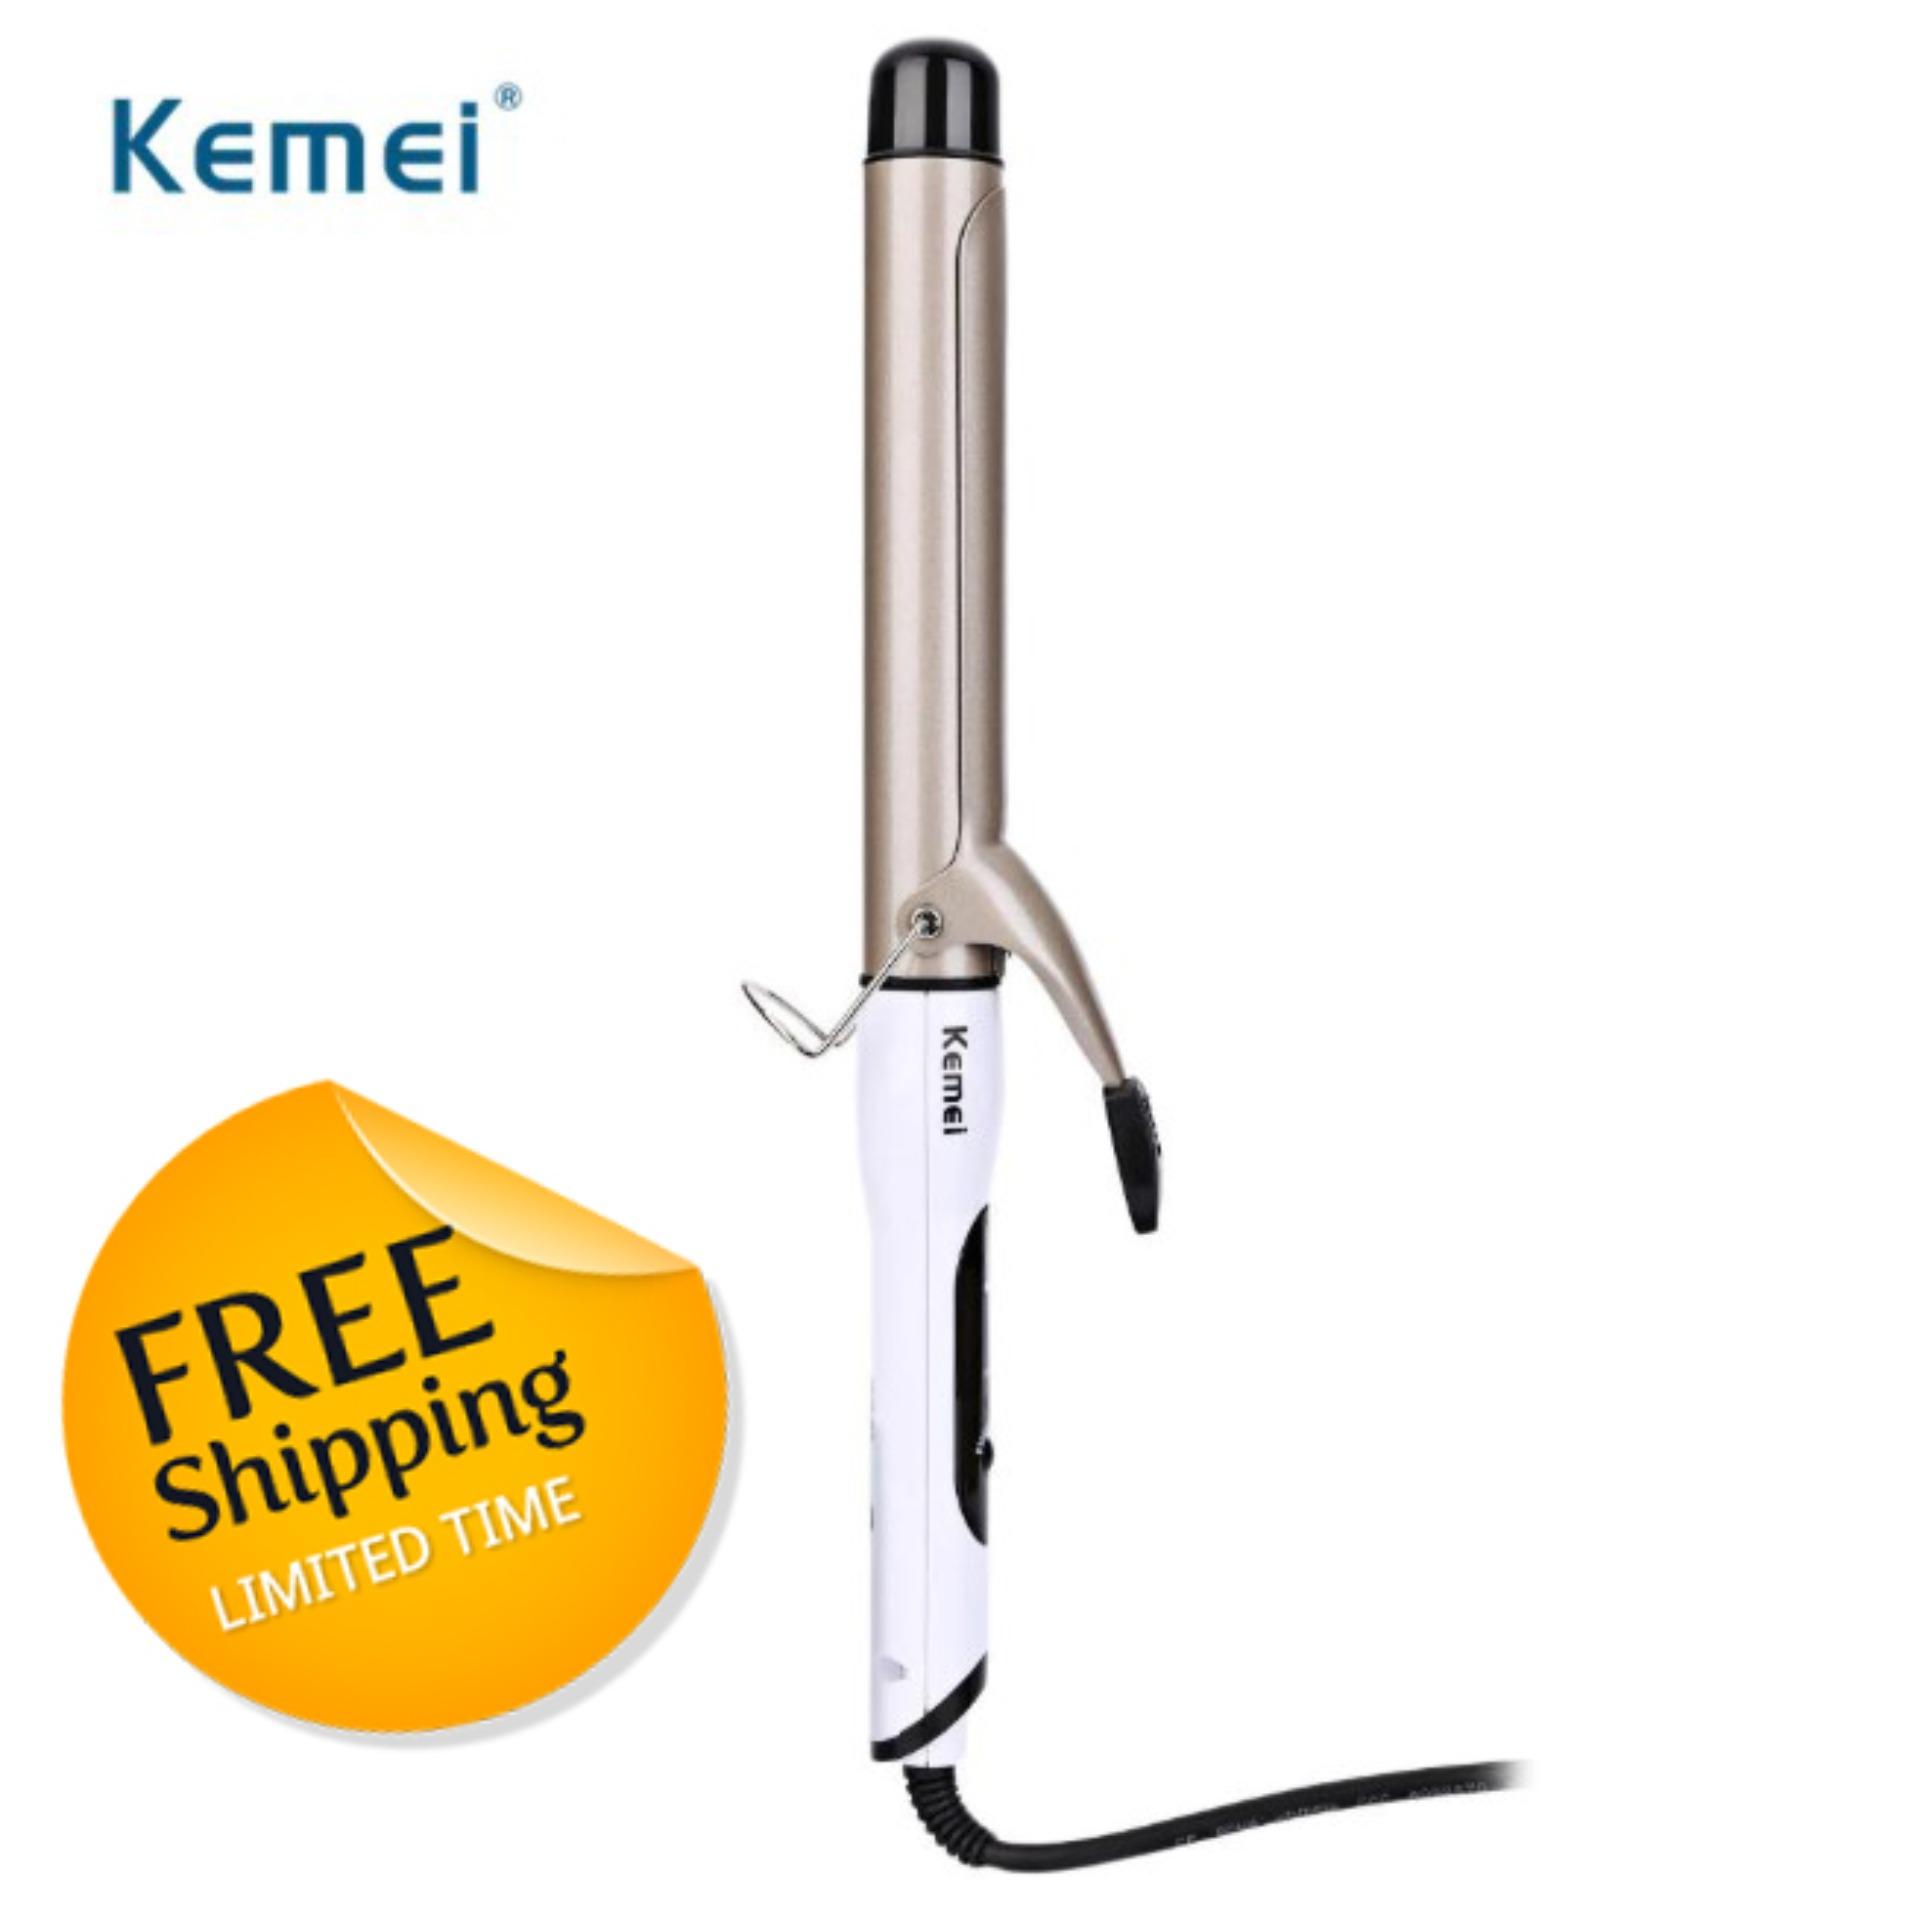 Kemei KM-1001A Ceramic Coating Negative Ions Hair Curler Rapid Heating Curling Iron 4 Levels Adjustable Hair Curler